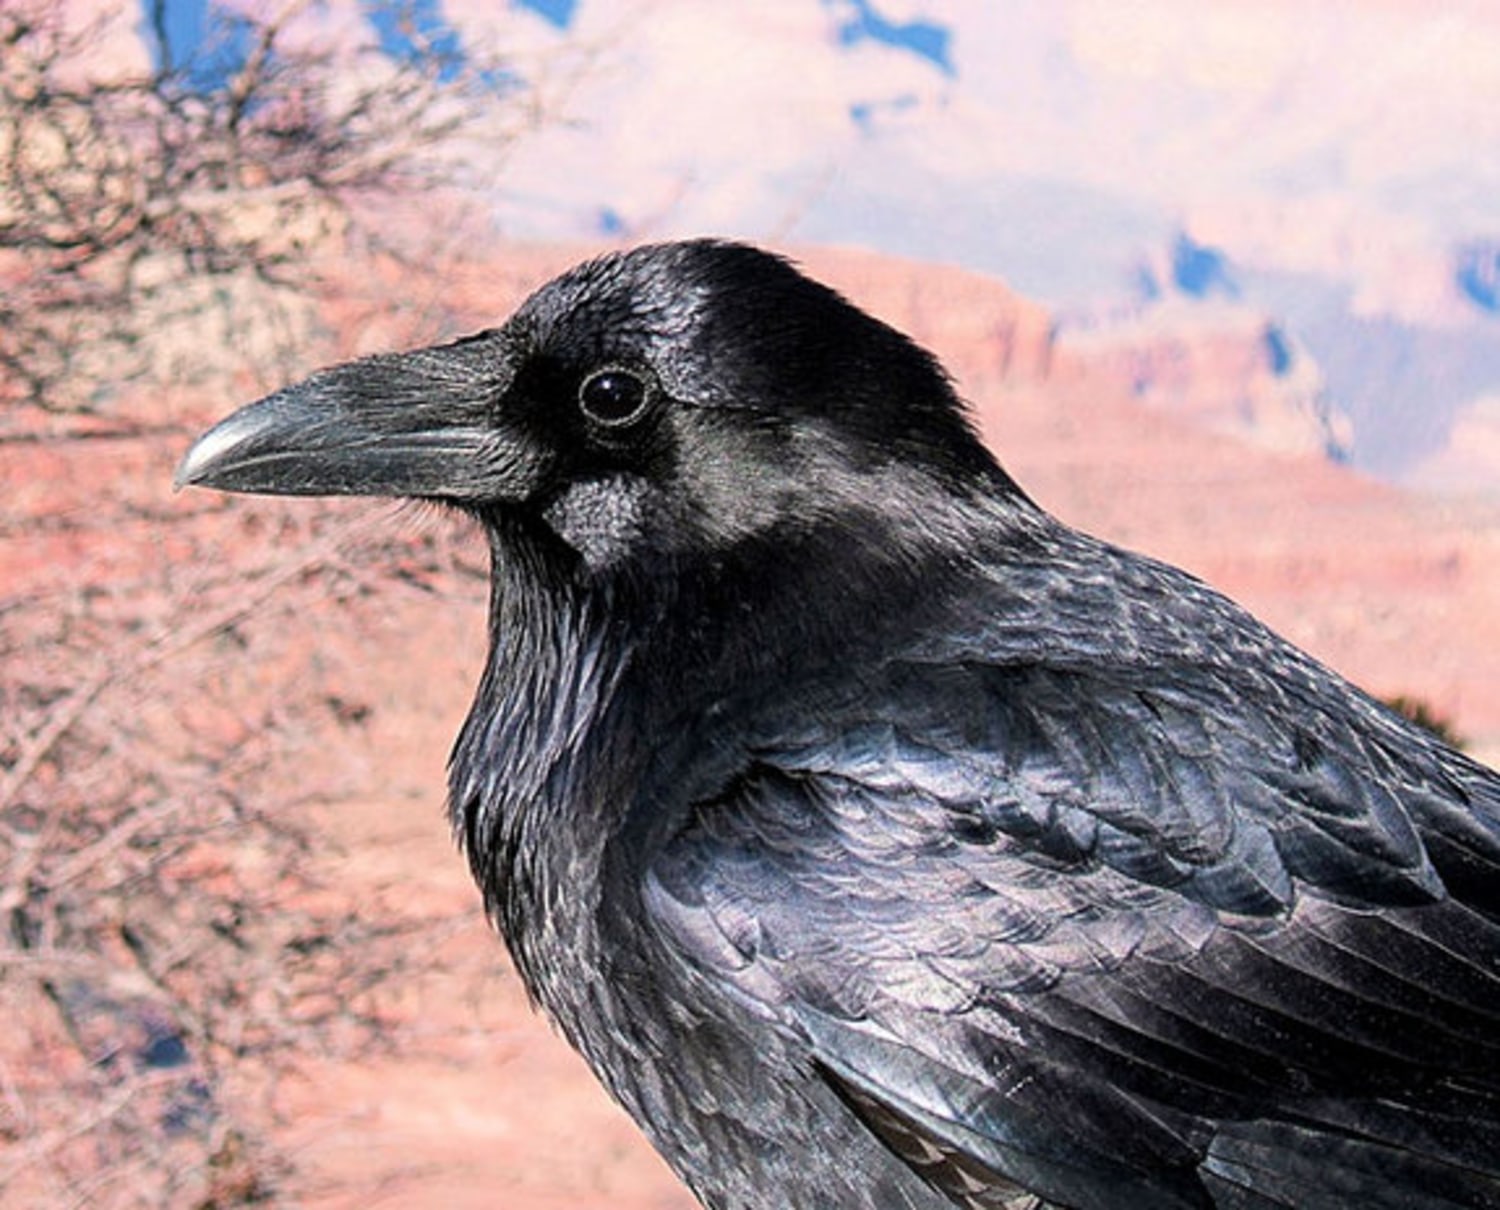 Hitchcockian crows gossip about mean humans